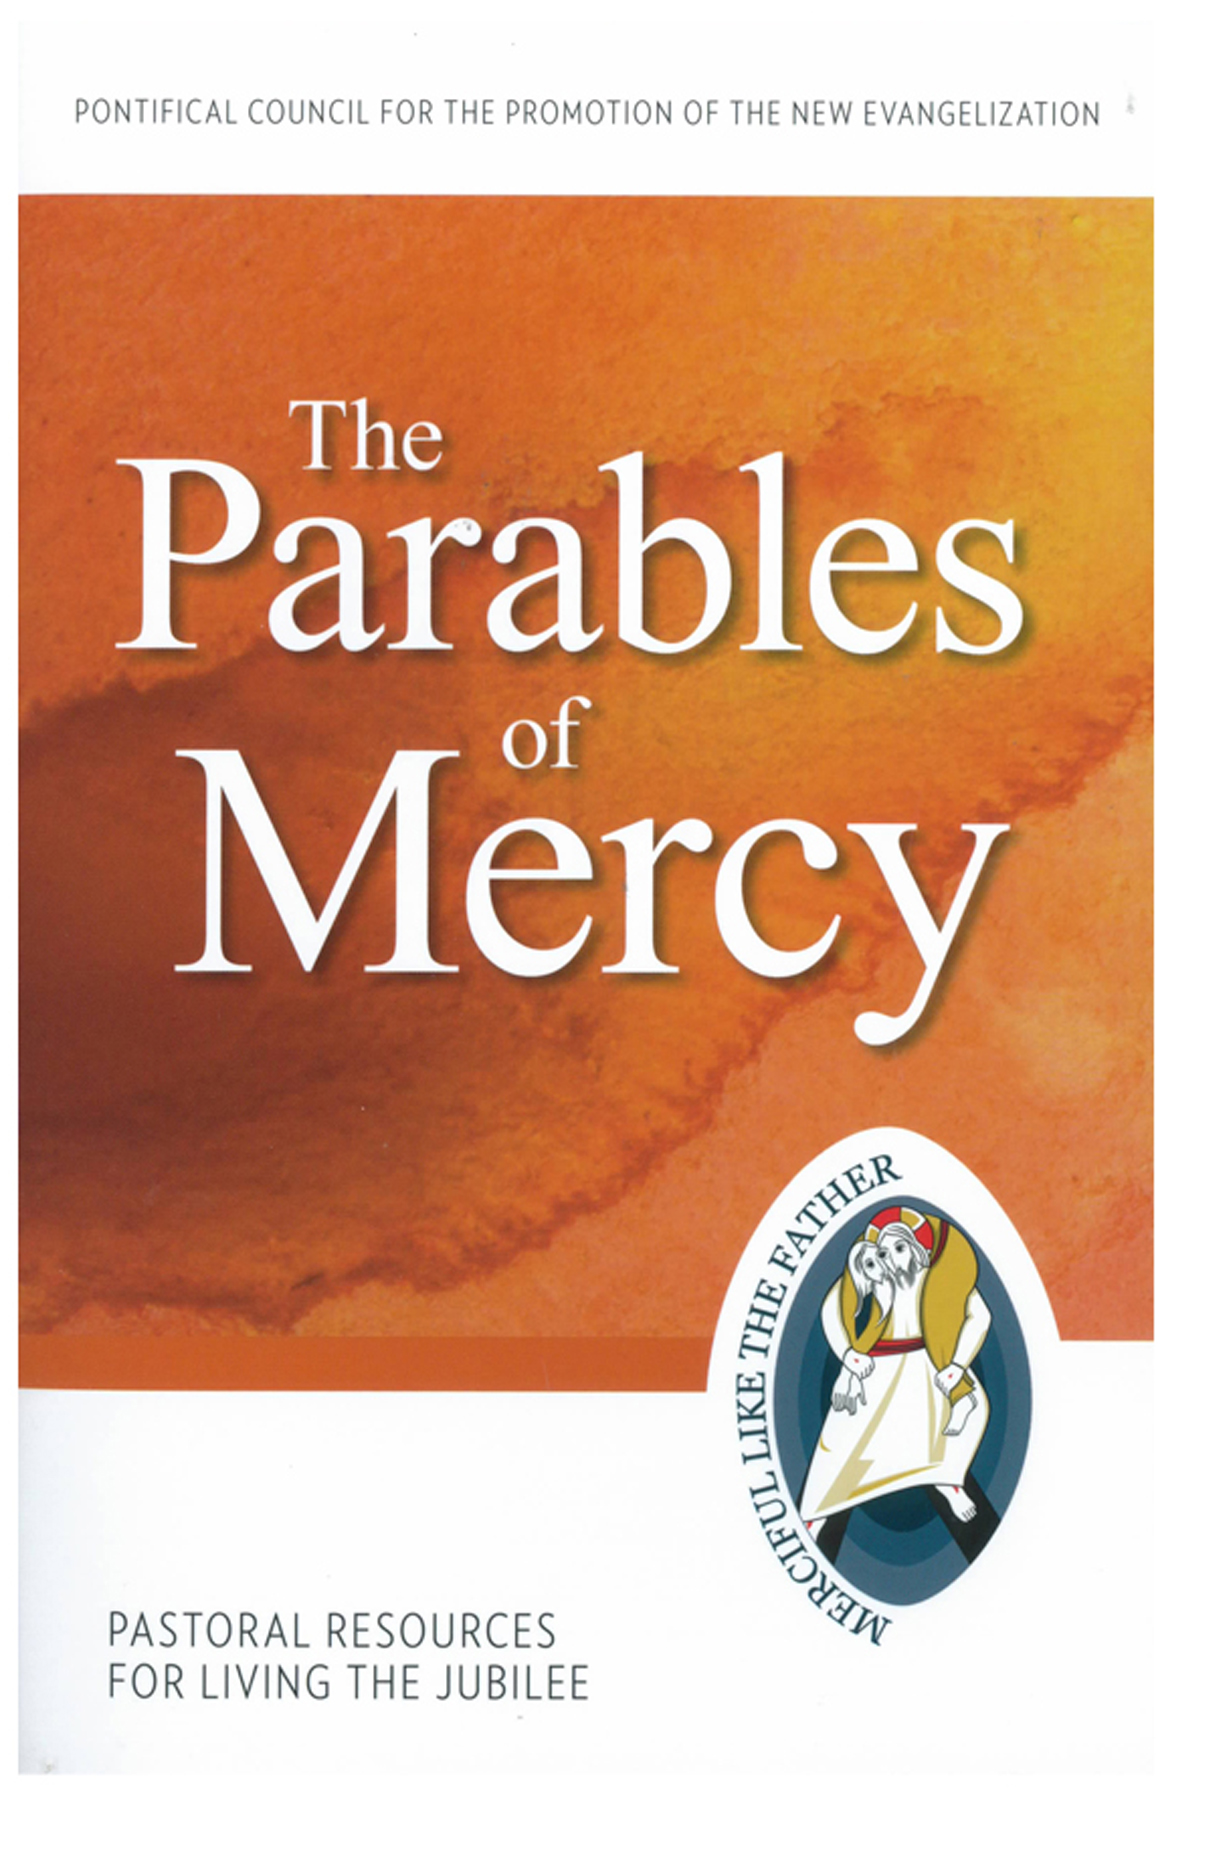 The Parables of Mercy 9781612789774 Pastoral Resources Living the Jubilee Pontifical Council for the Promotion of the New Evangelization Year of Mercy Books